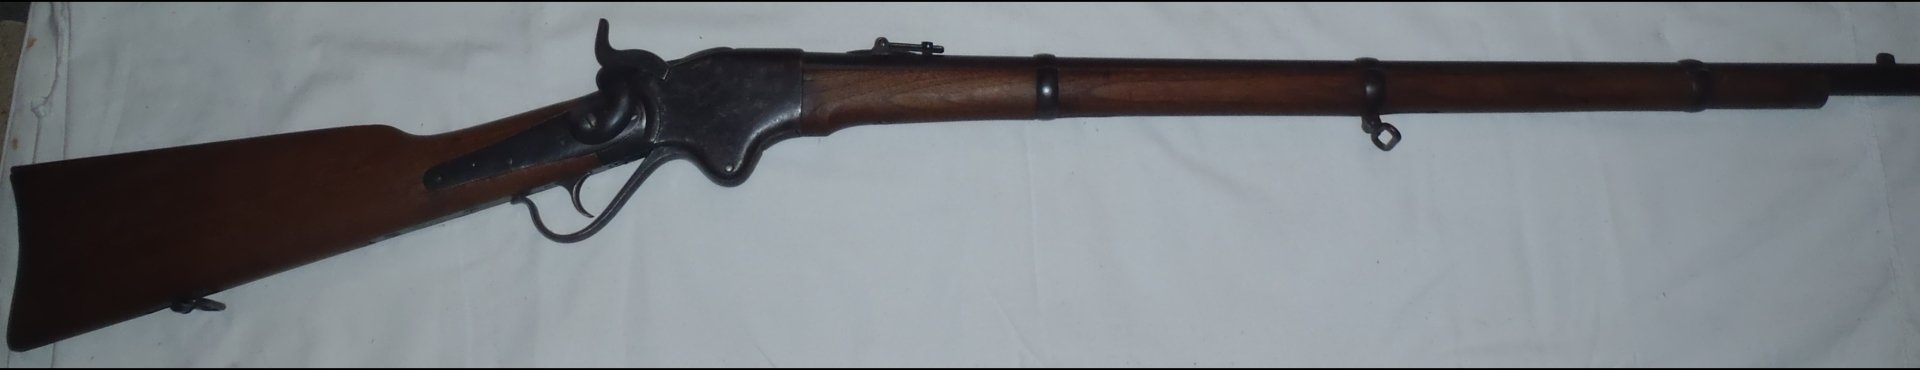 Spencer Repeating Rifle #1